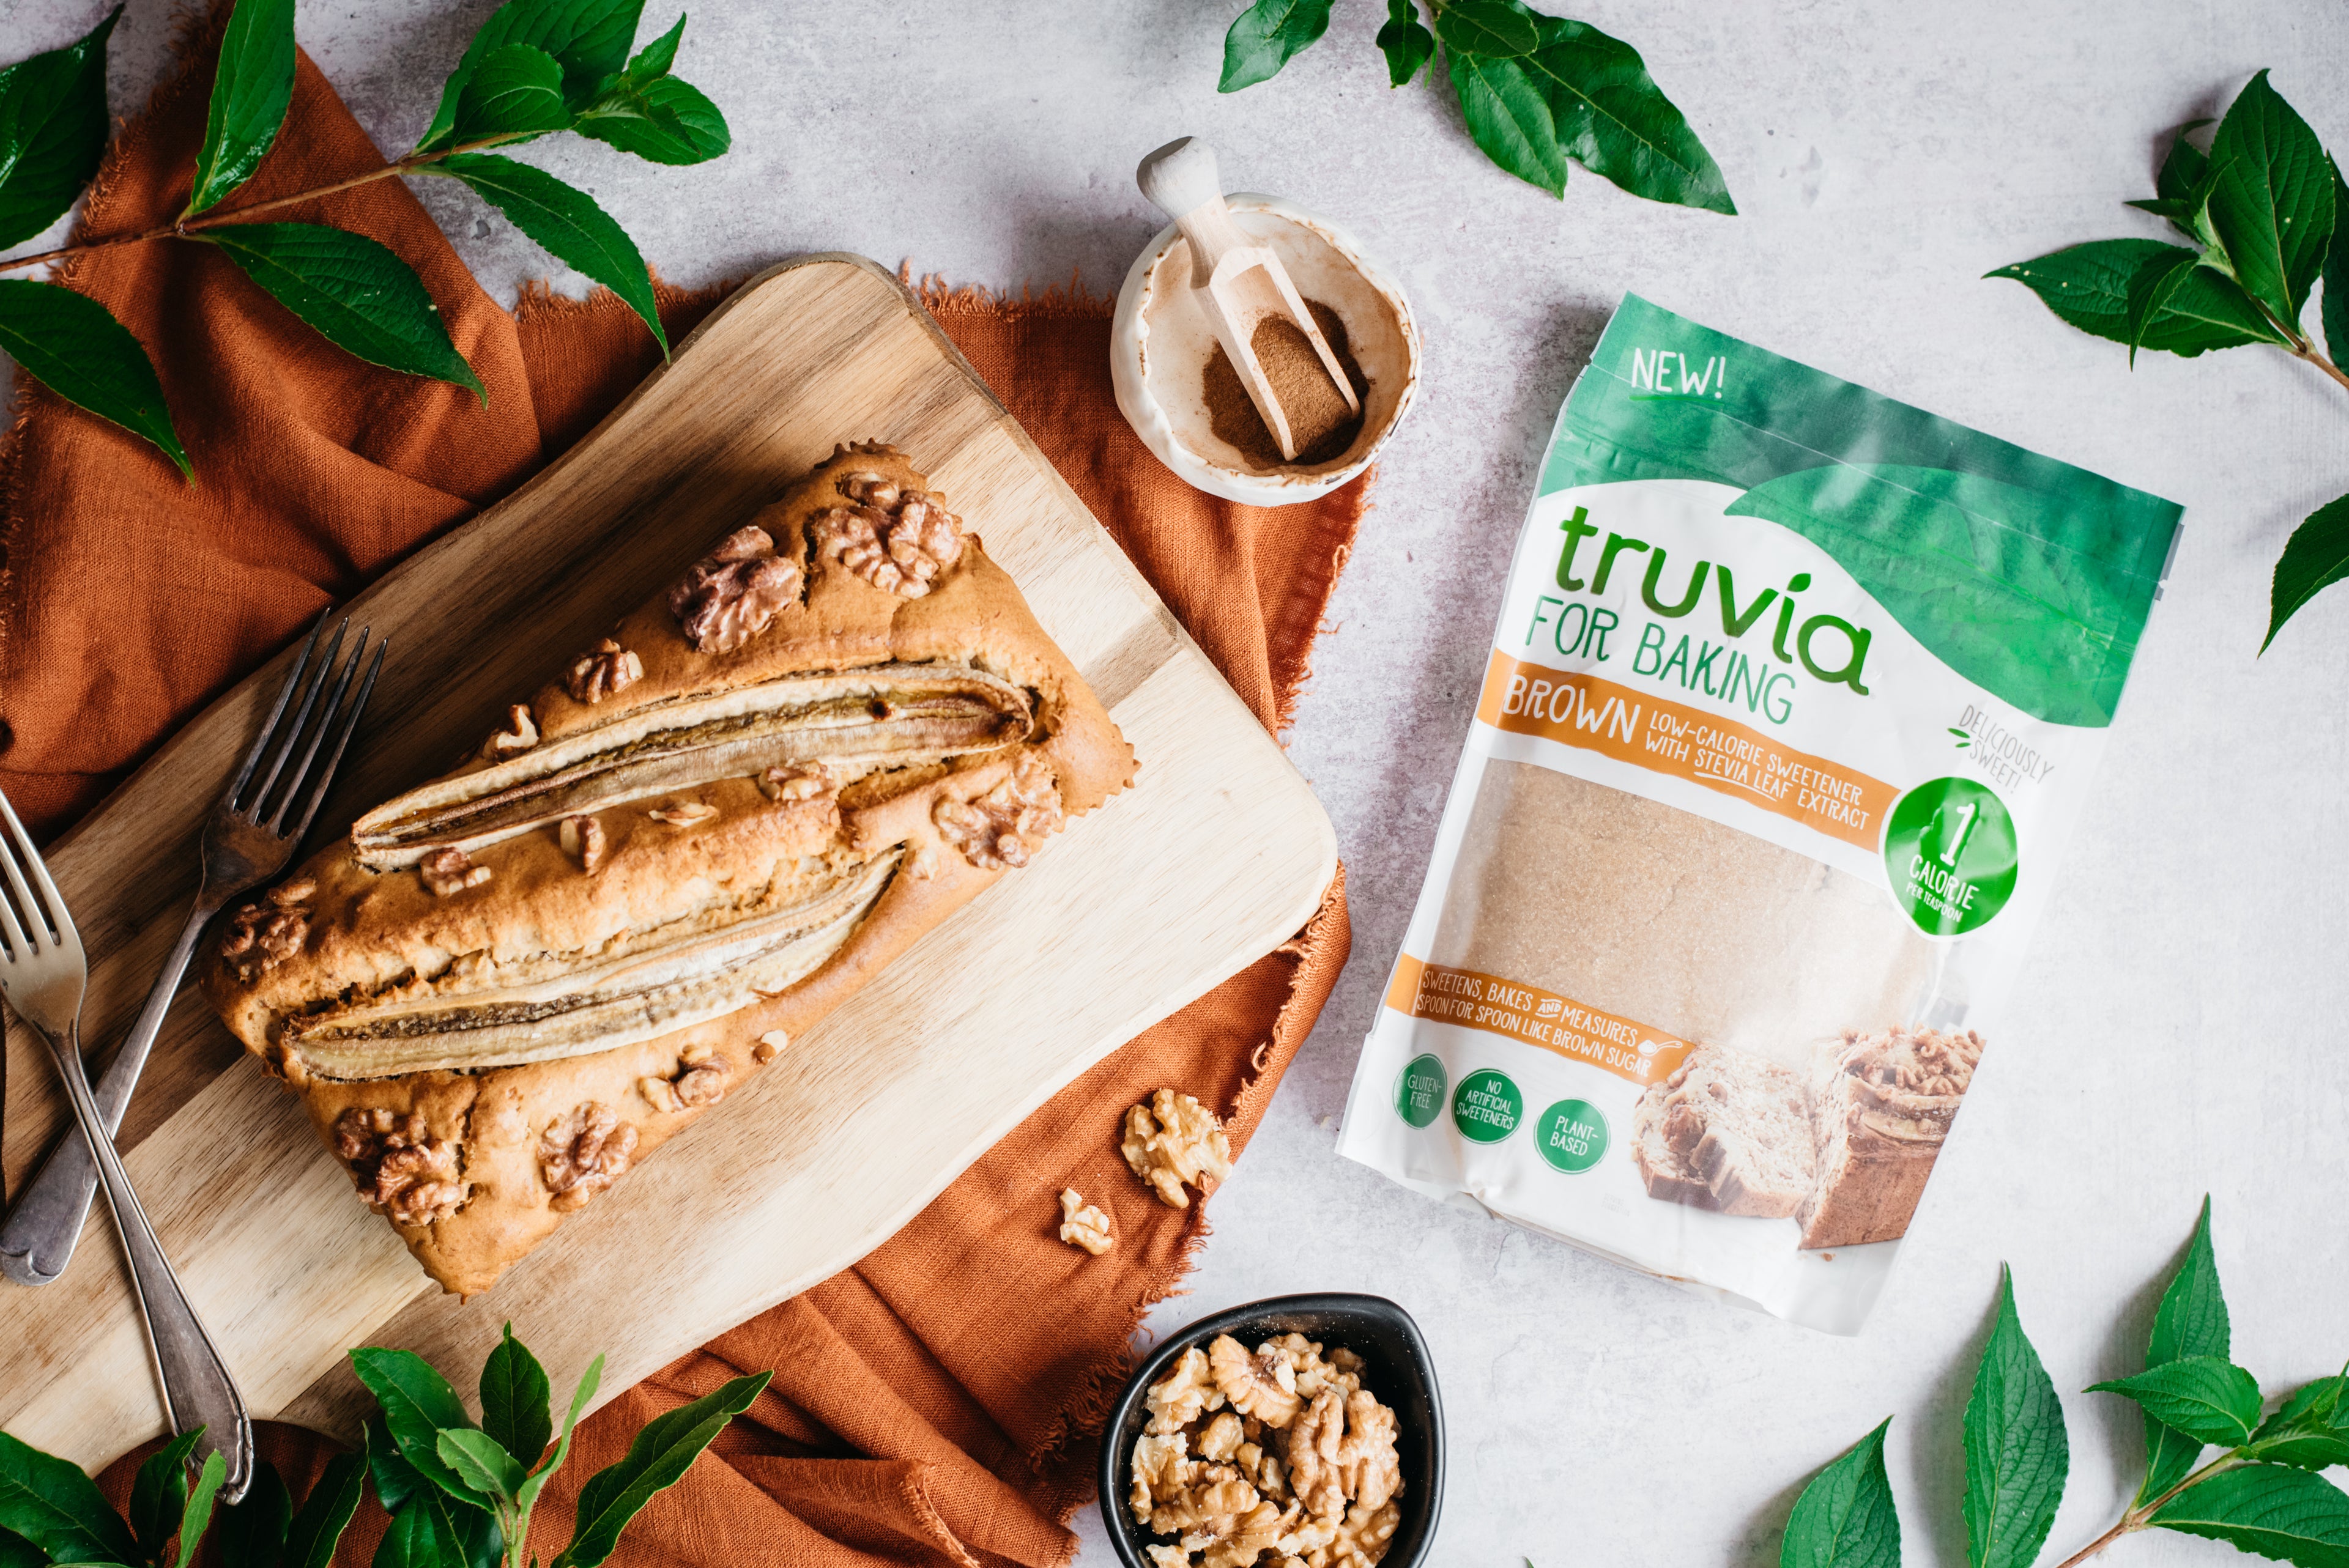 A top down view of a loaf of healthy banana bread next to a pack of truvia for baking brown sugar substitute